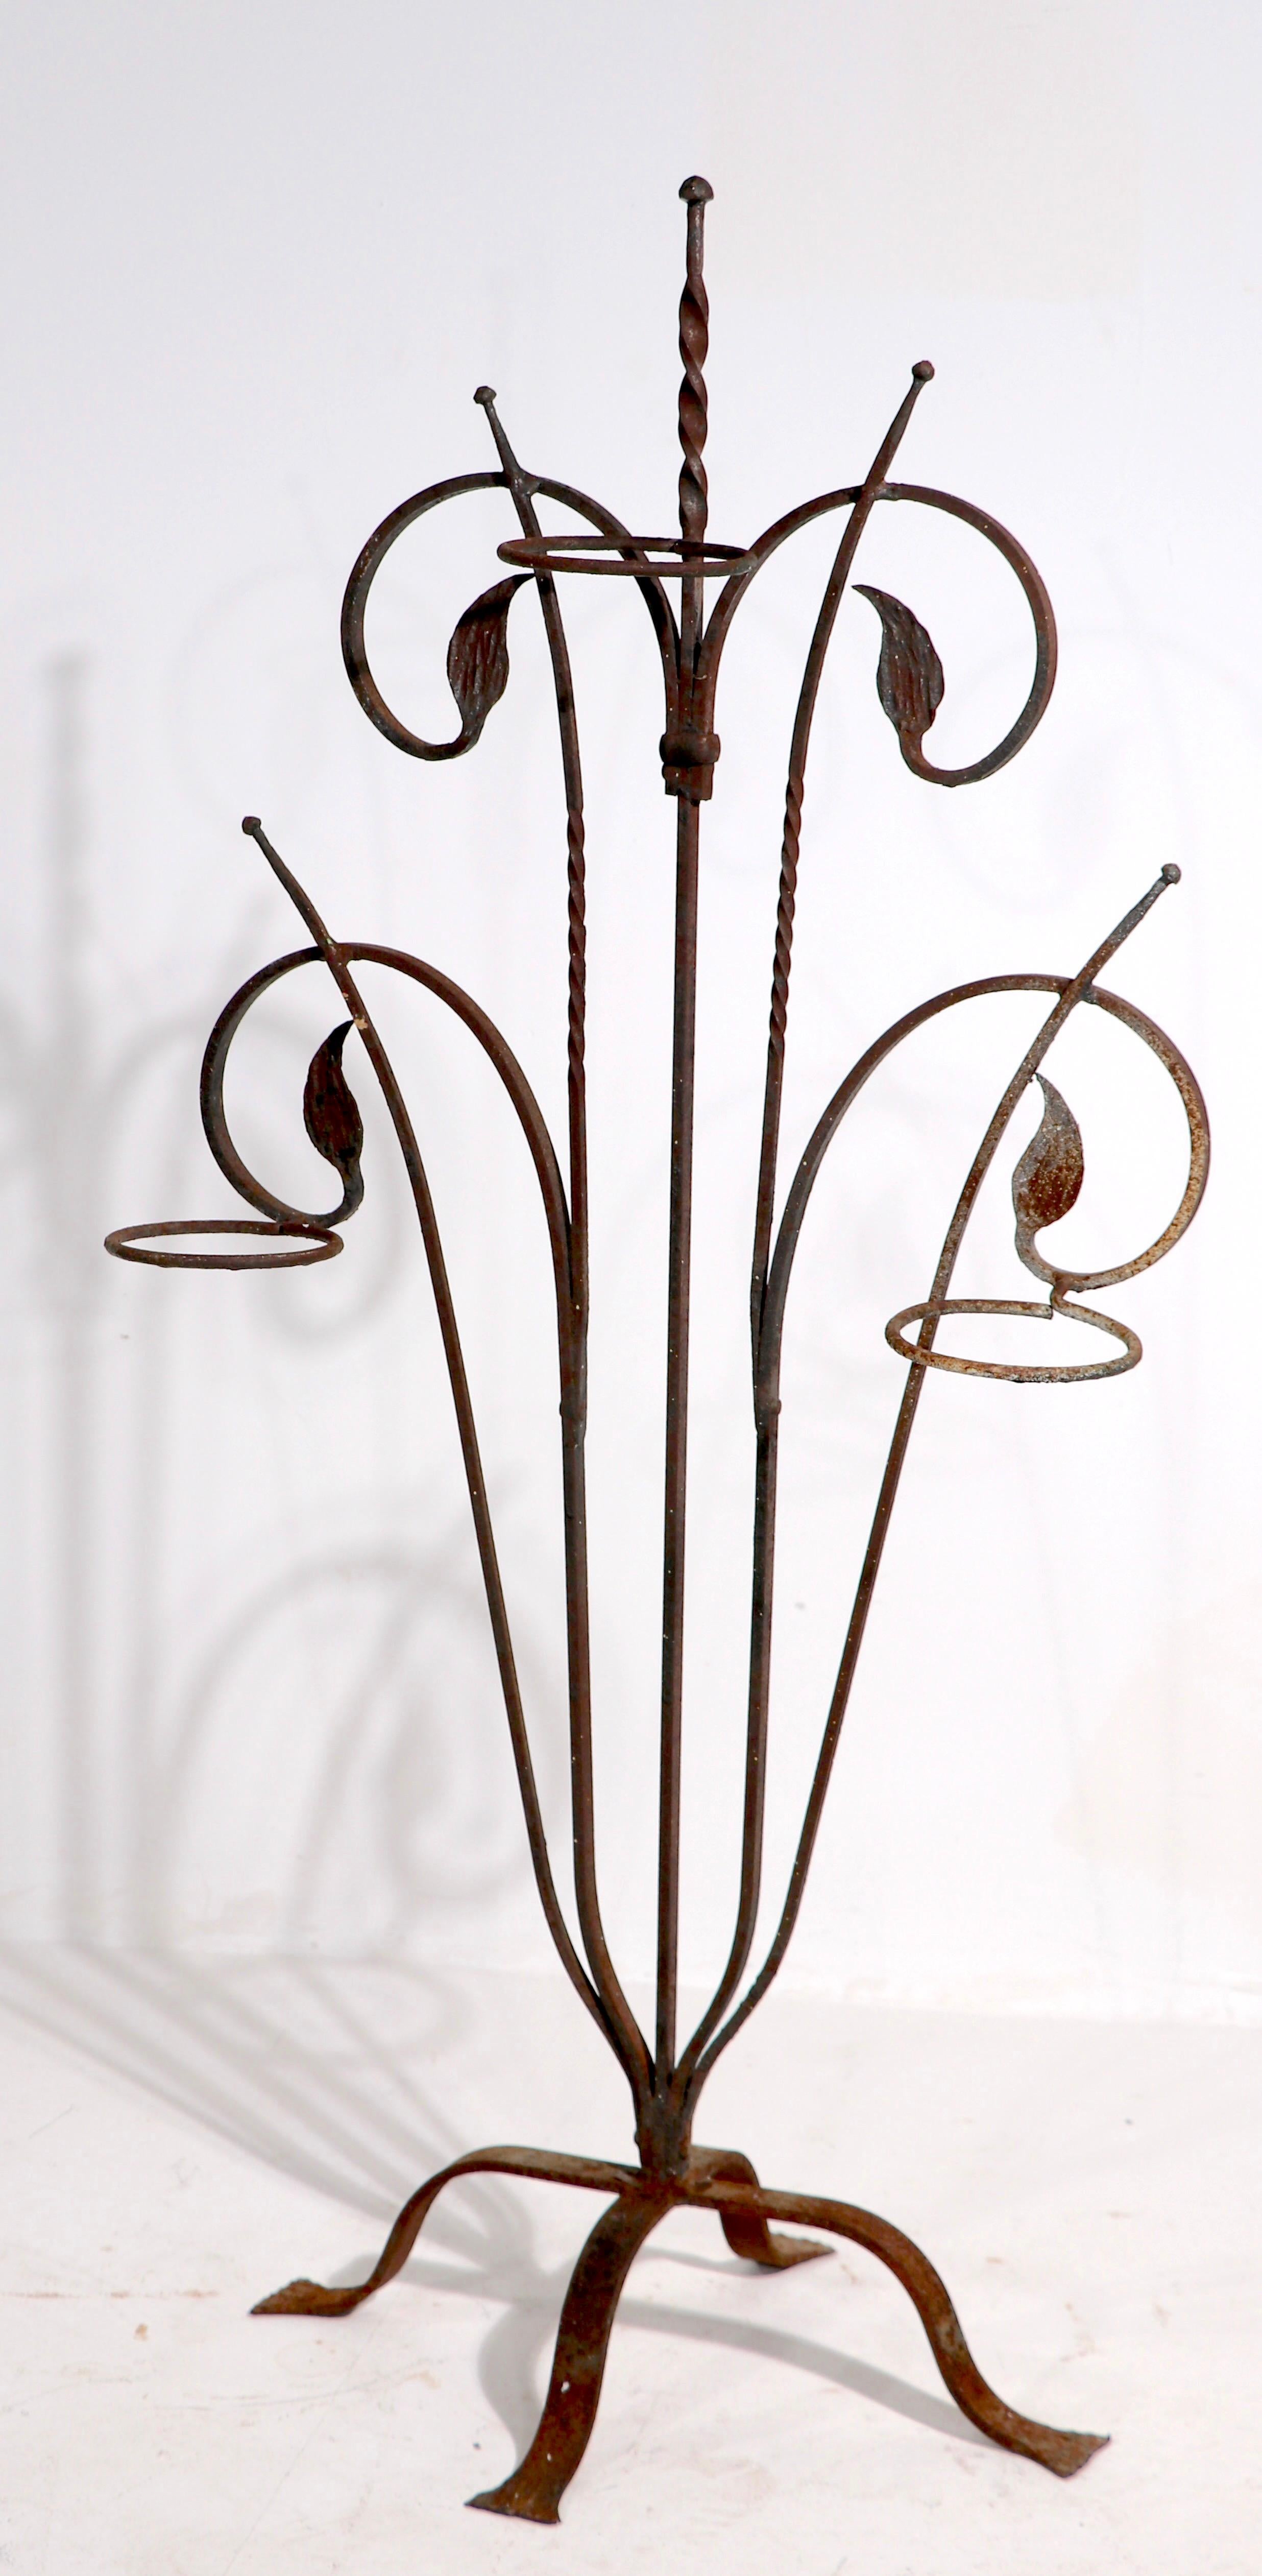 Outstanding hand wrought Art Deco plant stand attributed to Salterini. This example features three ring form plant holders each 4.5 in. dia. - foliate motif structure, original finish, shows surface rust, normal and consistent with age. Use as is,